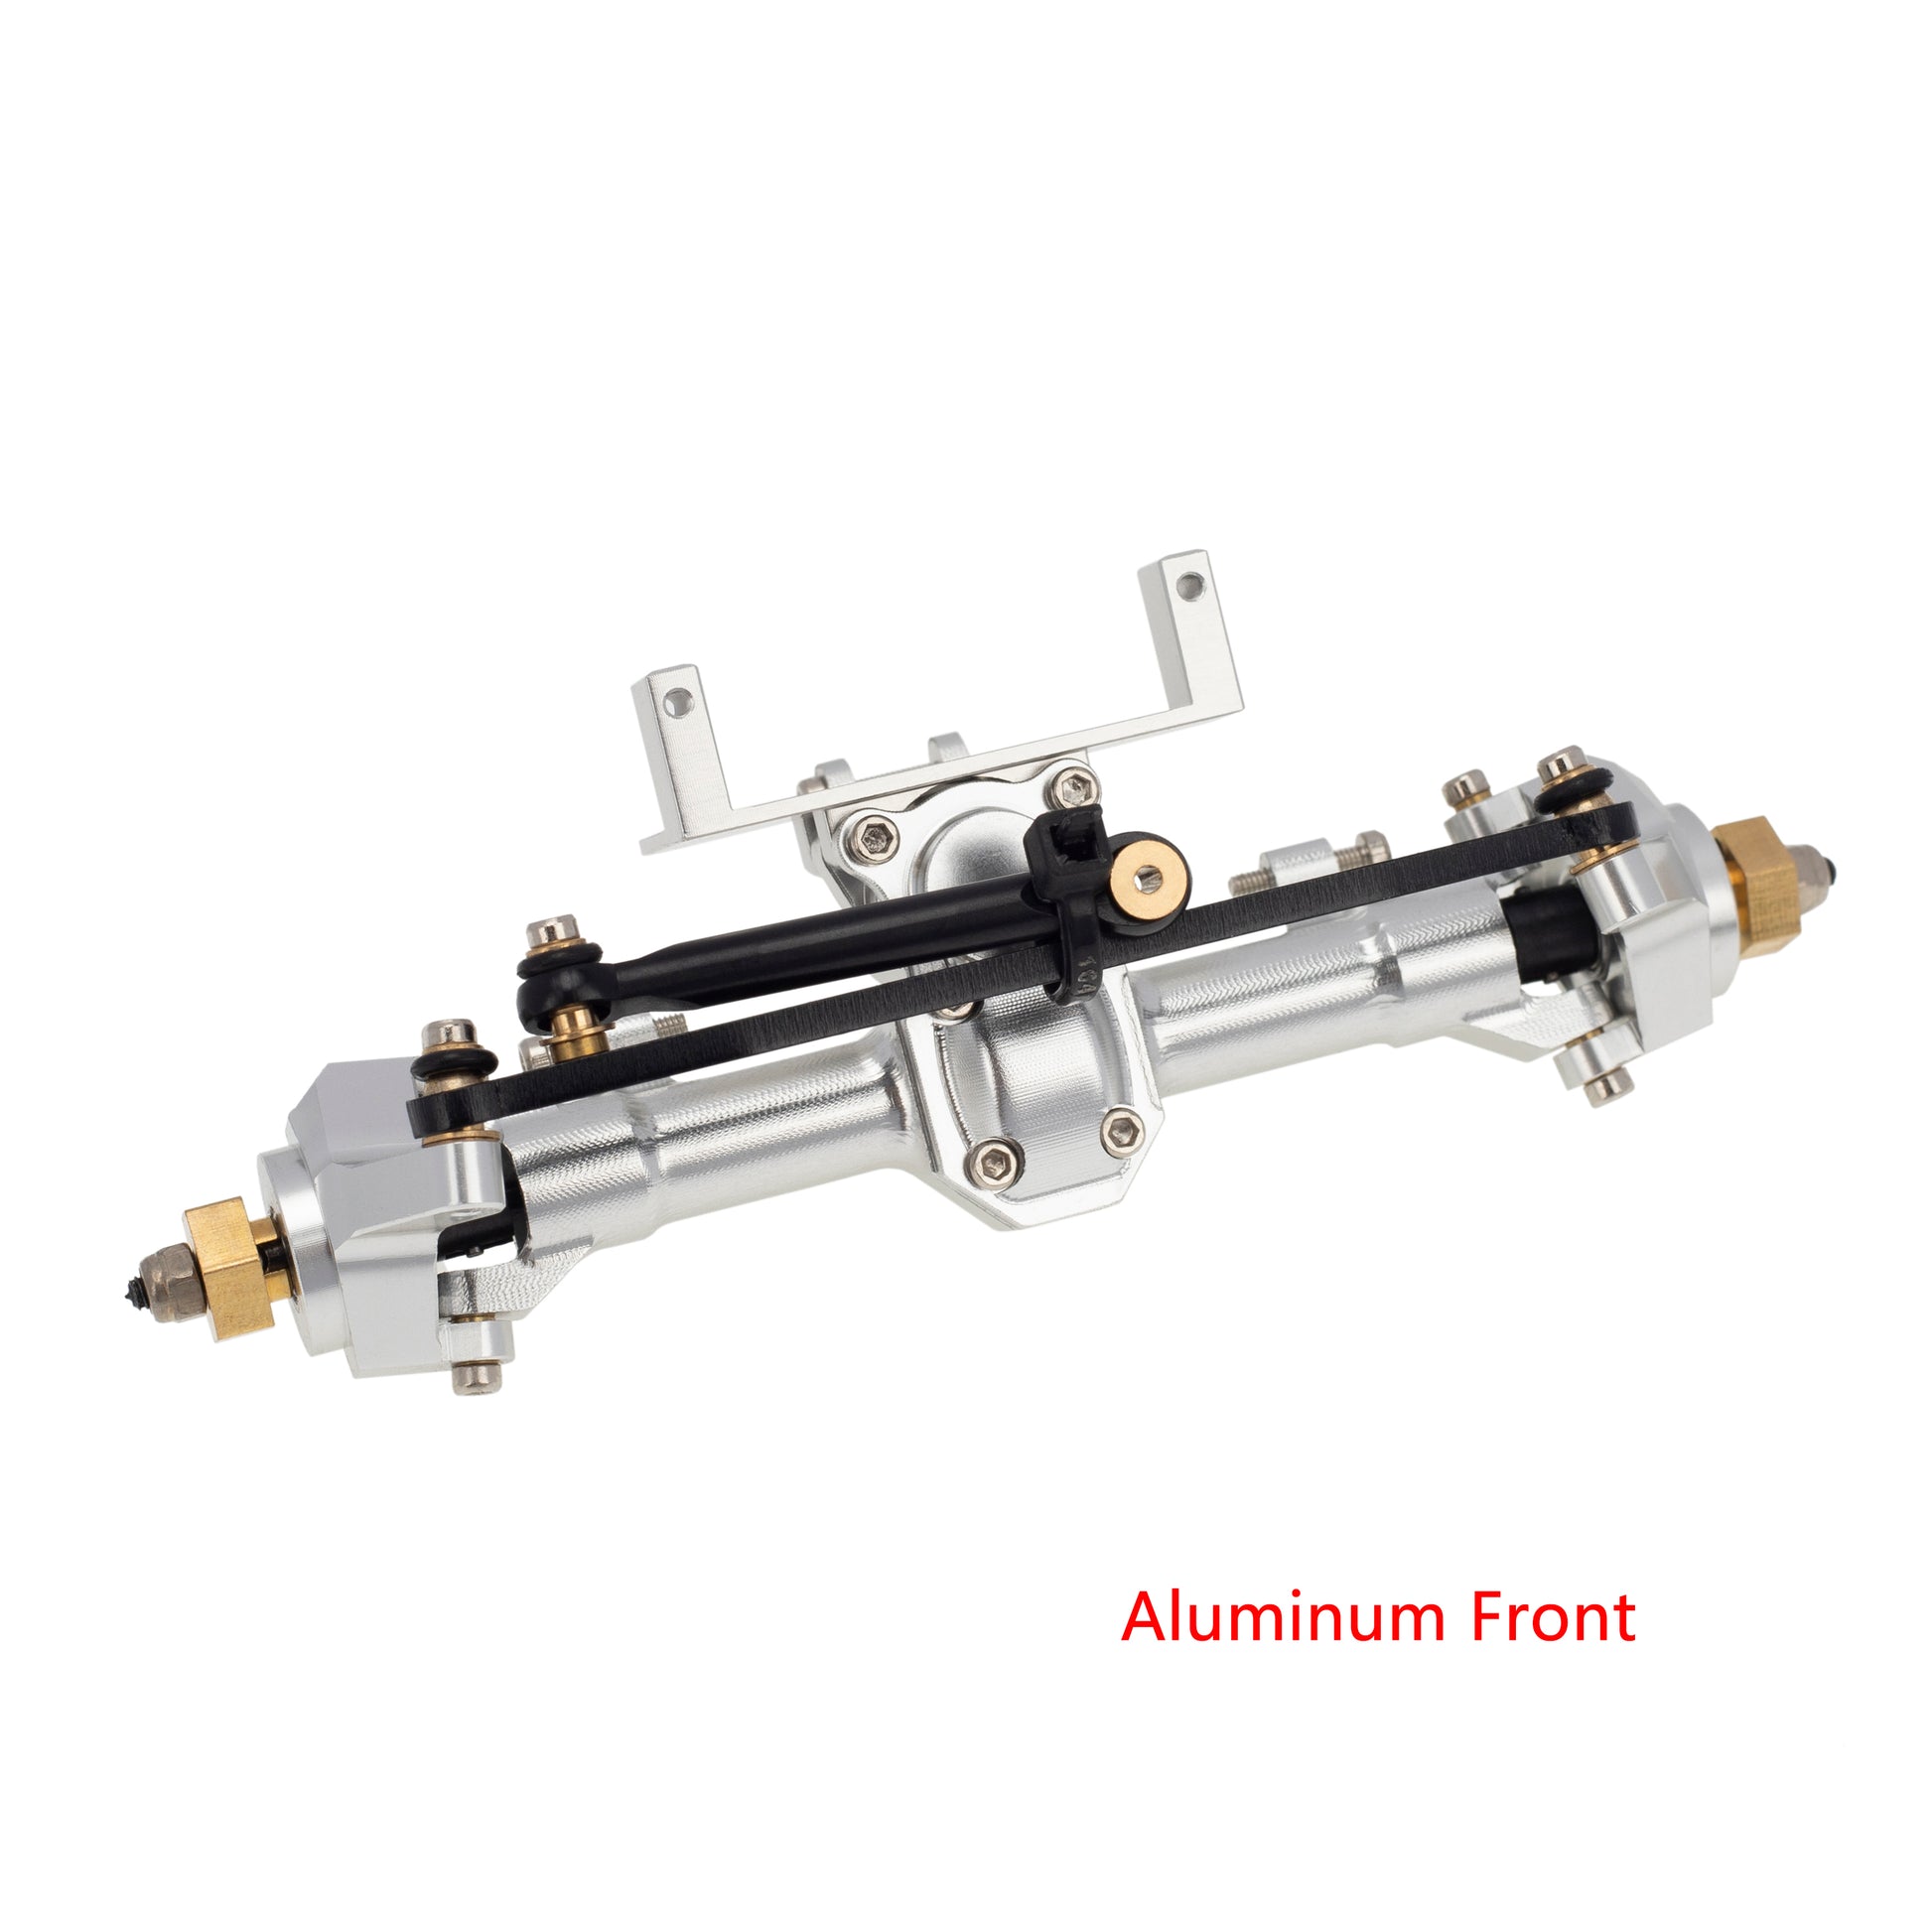 Aluminum Front Axle for Axial SCX24 silver